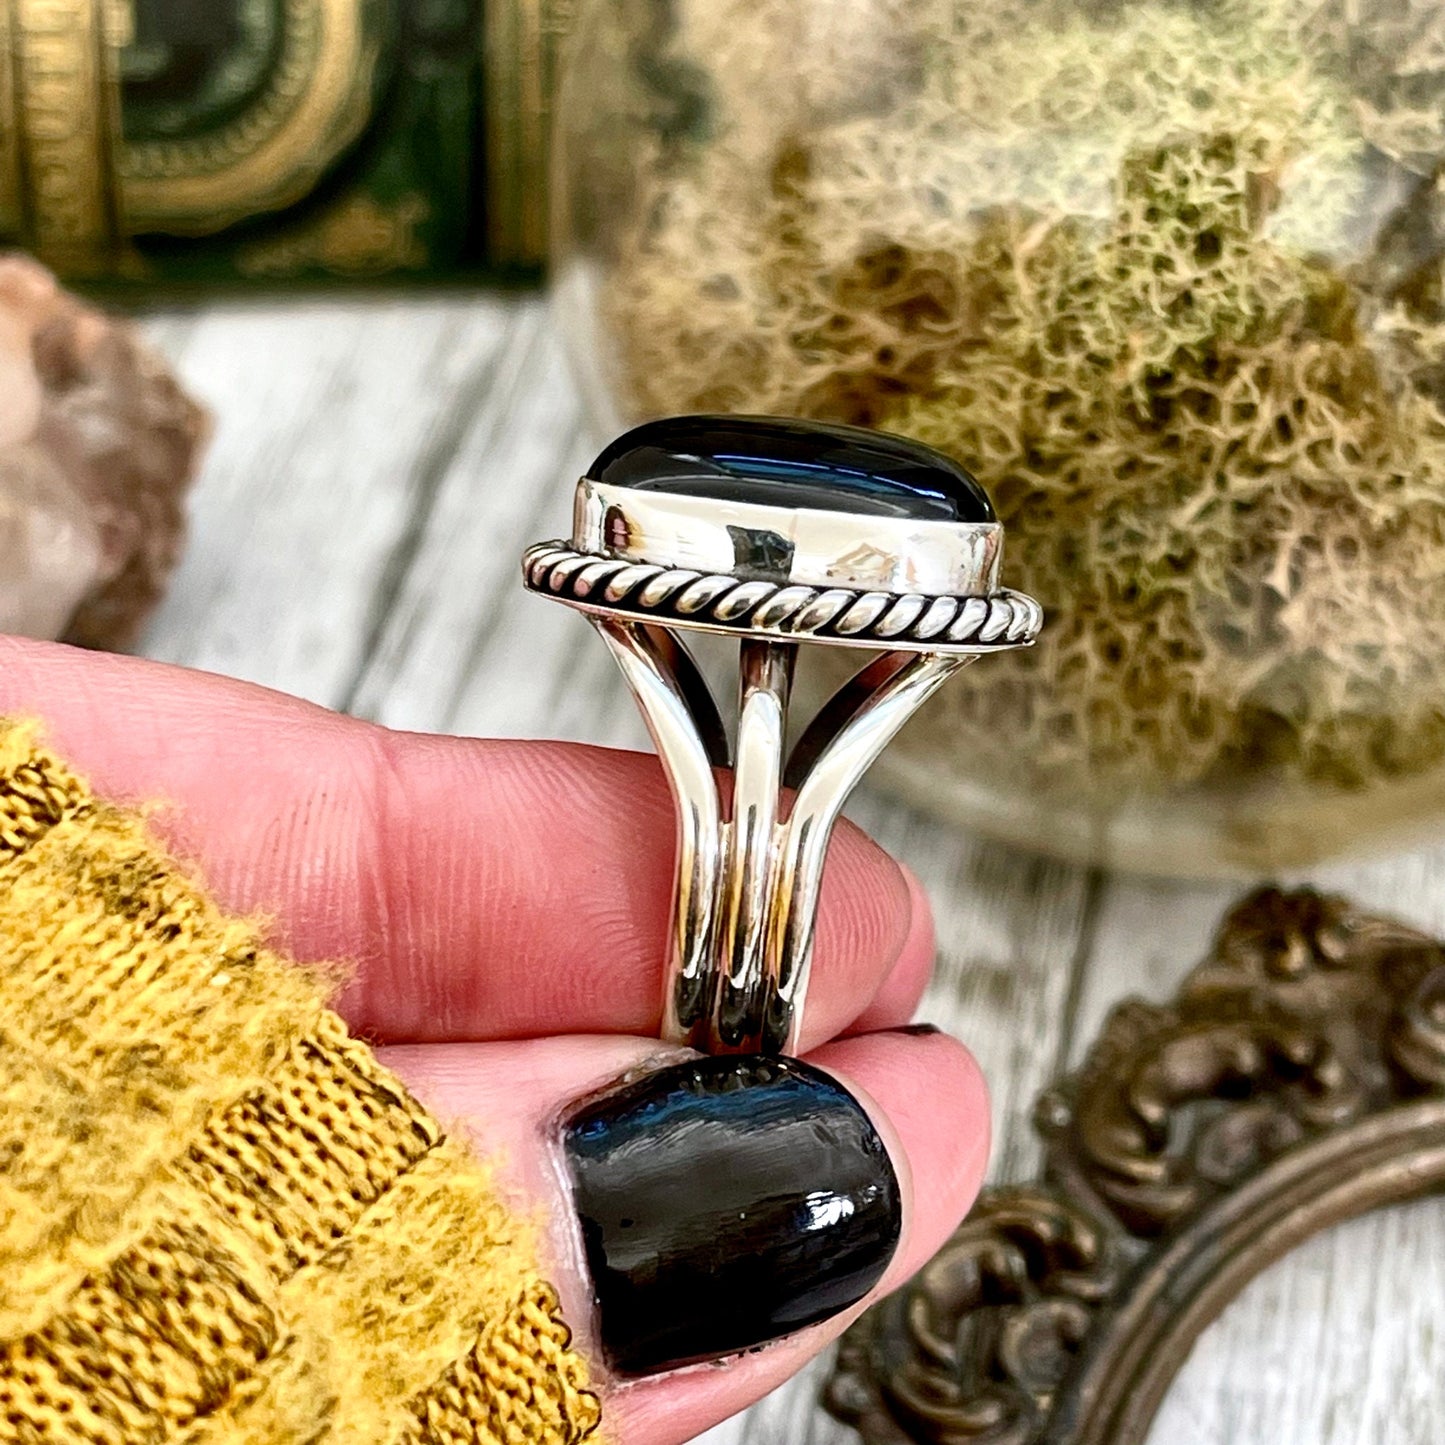 Size 8 9 10 Black Onyx Statement Ring Set in Sterling Silver / Curated by FOXLARK Collection